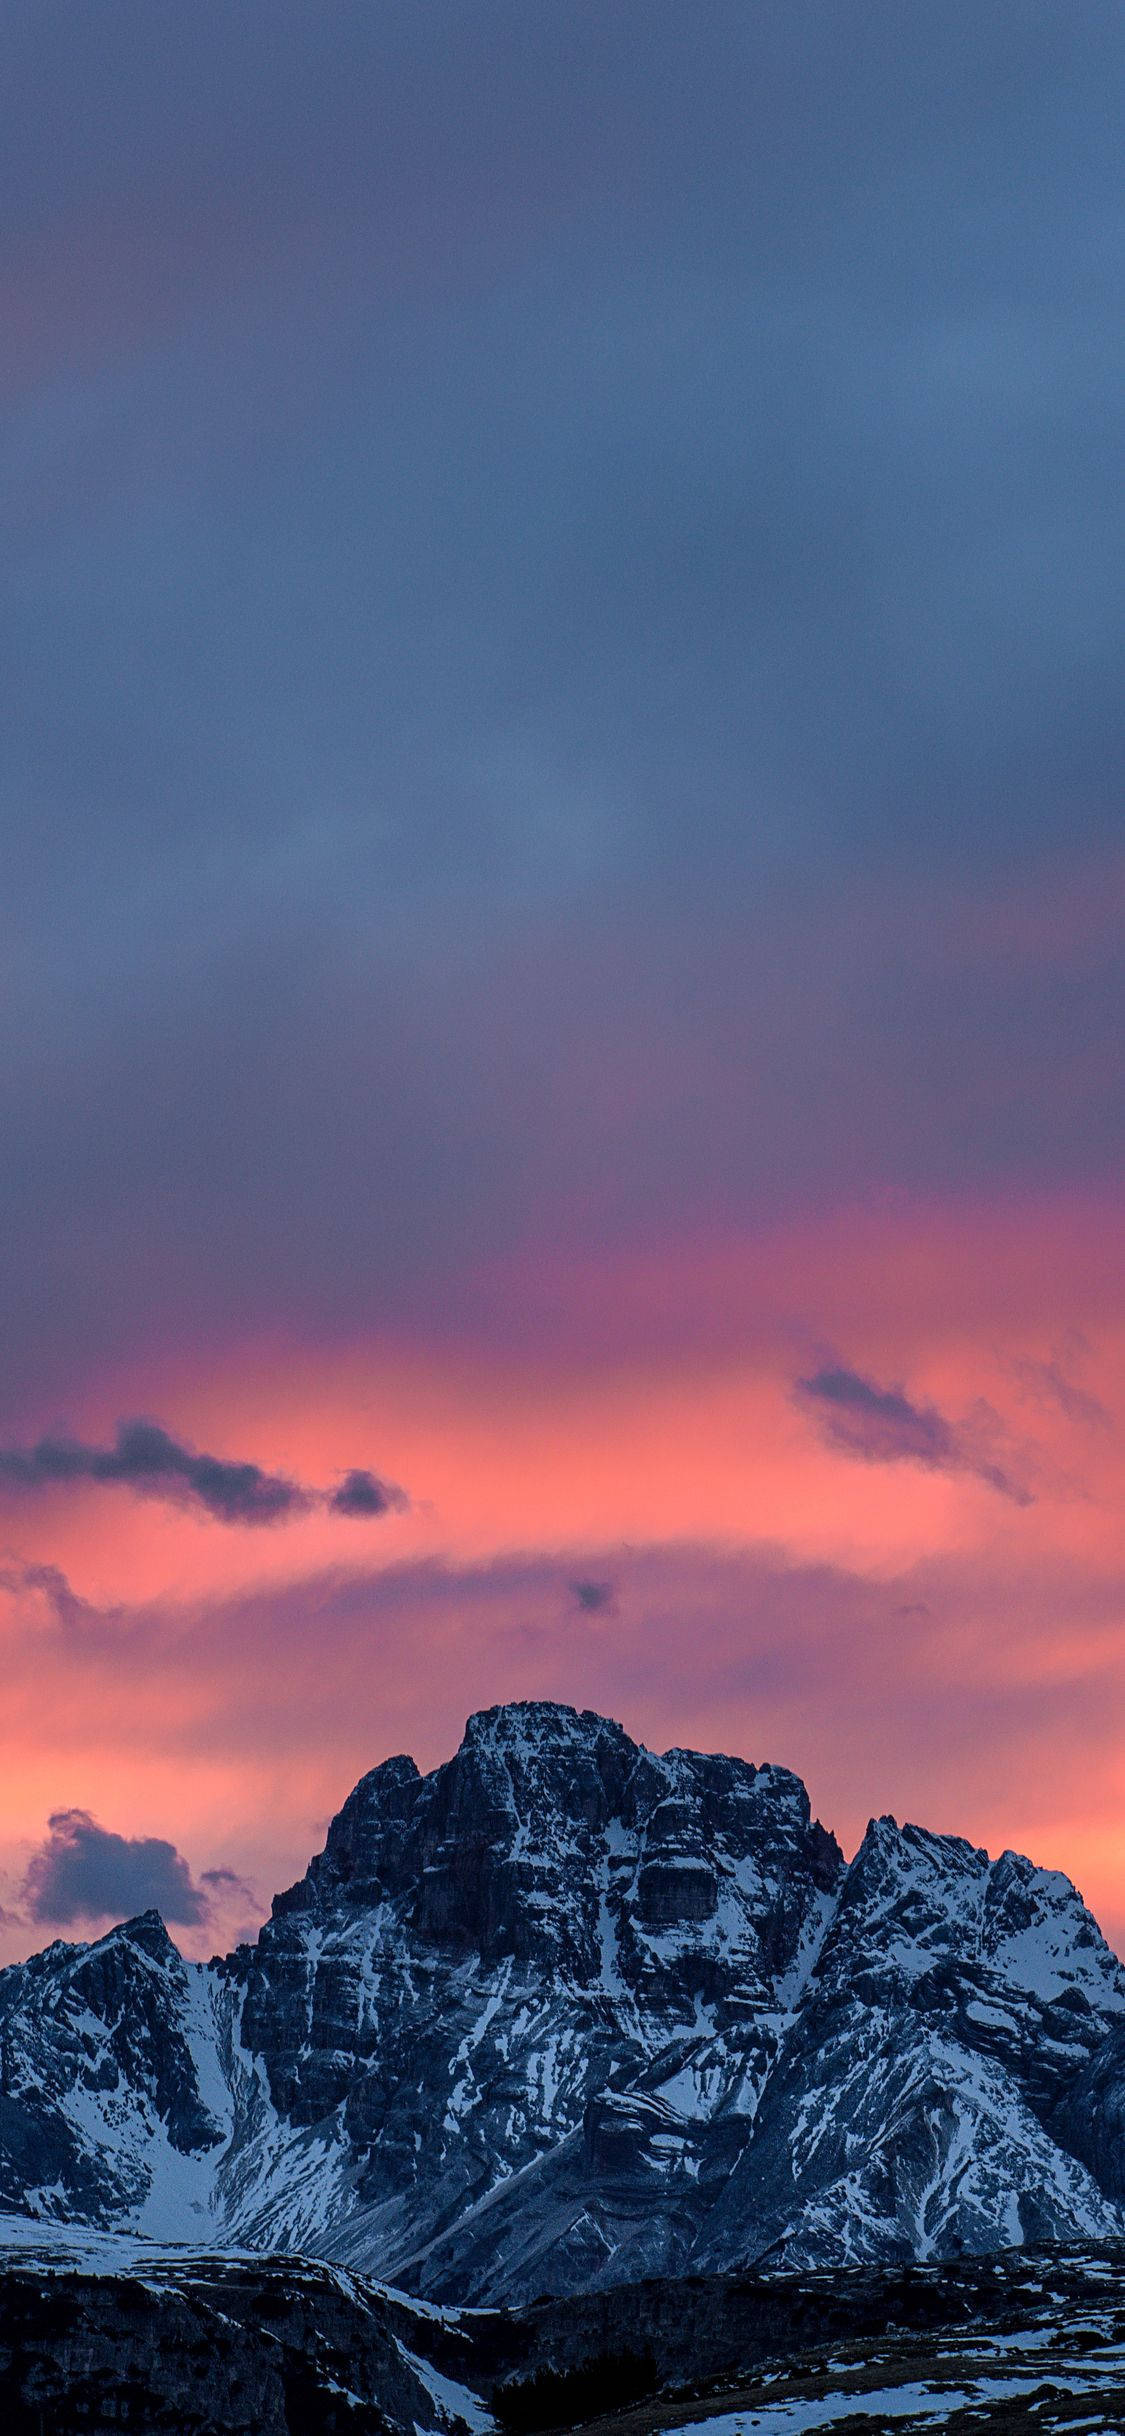 A Mountain Range With A Pink Sky Background